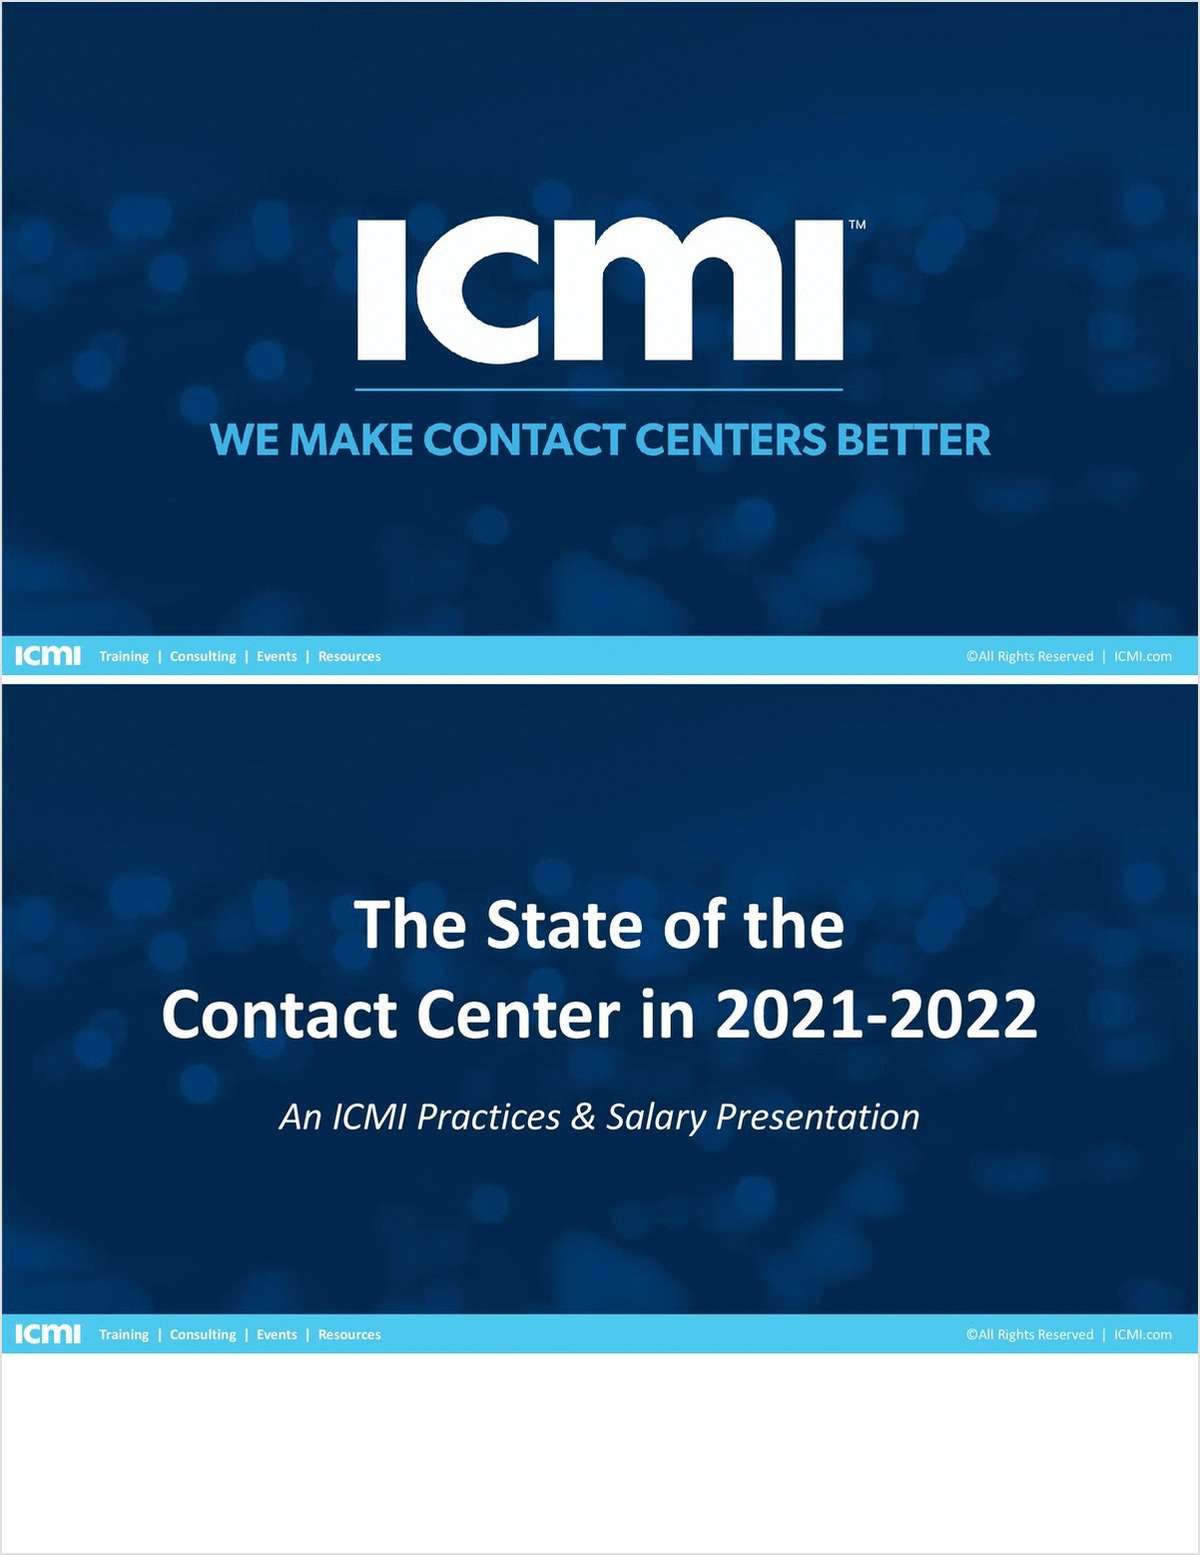 The State of the Contact Center in 2021-2022